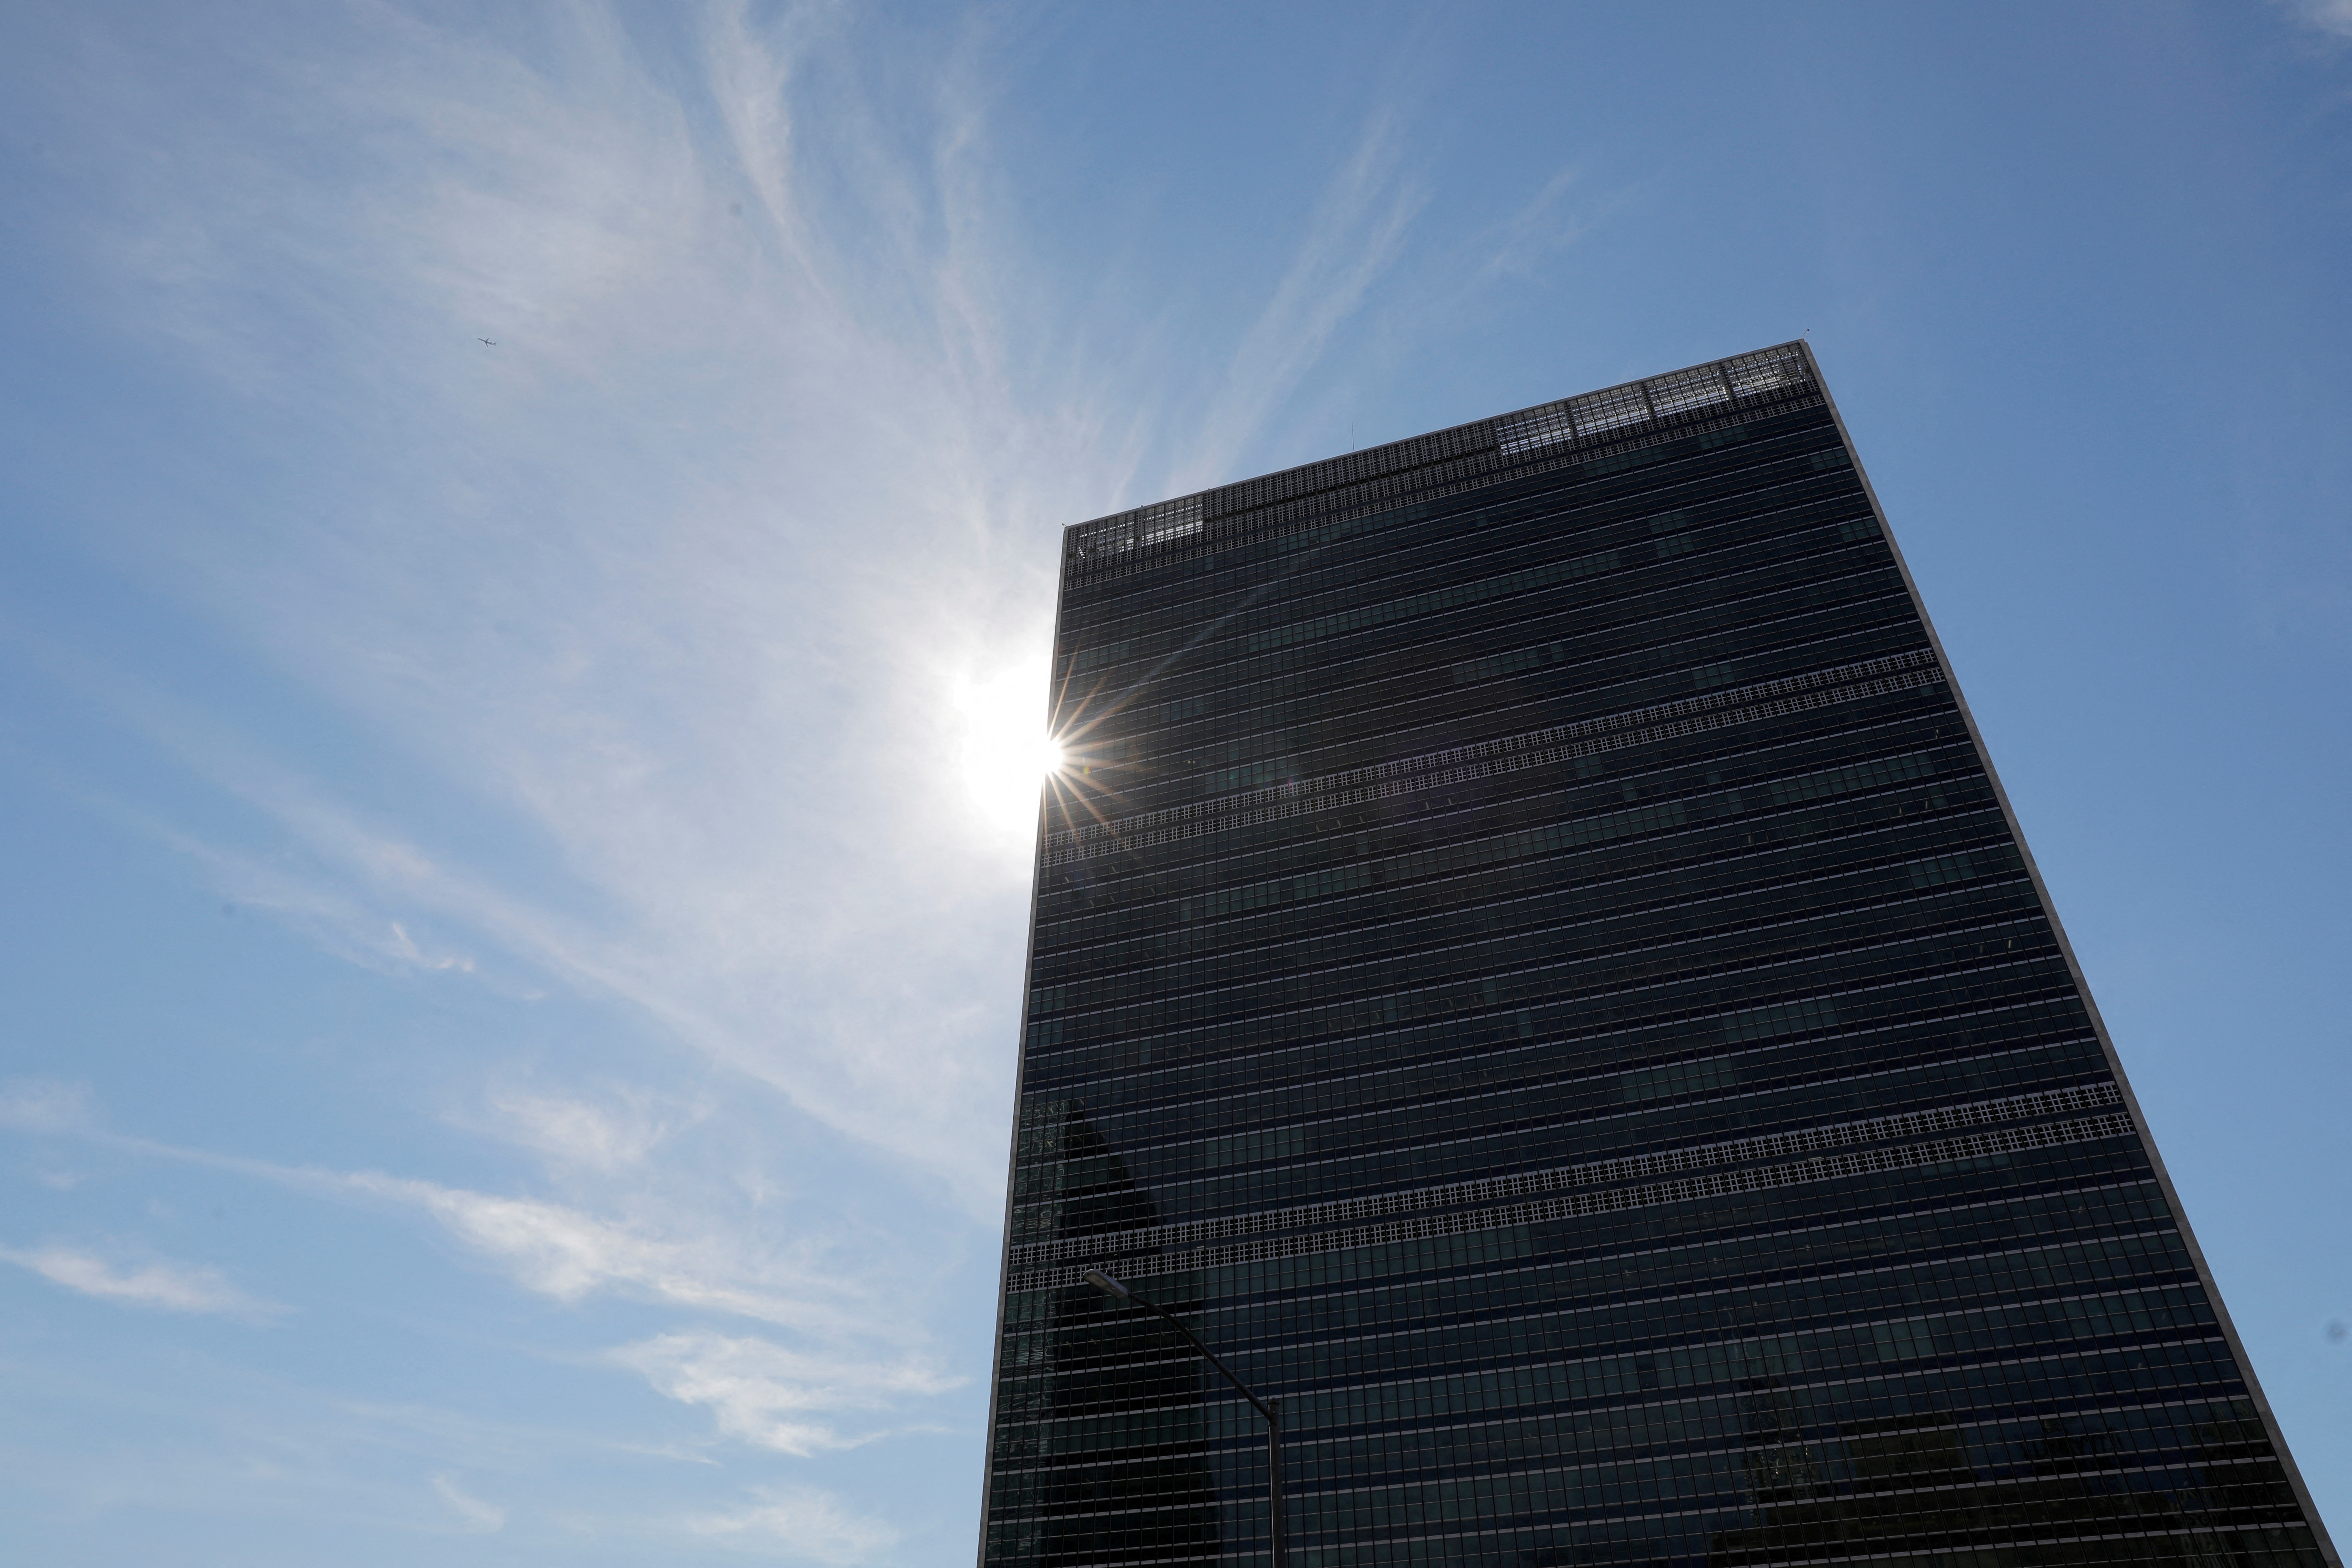 The sun shines behind the United Nations Secretariat Building at the United Nations Headquarters in New York City